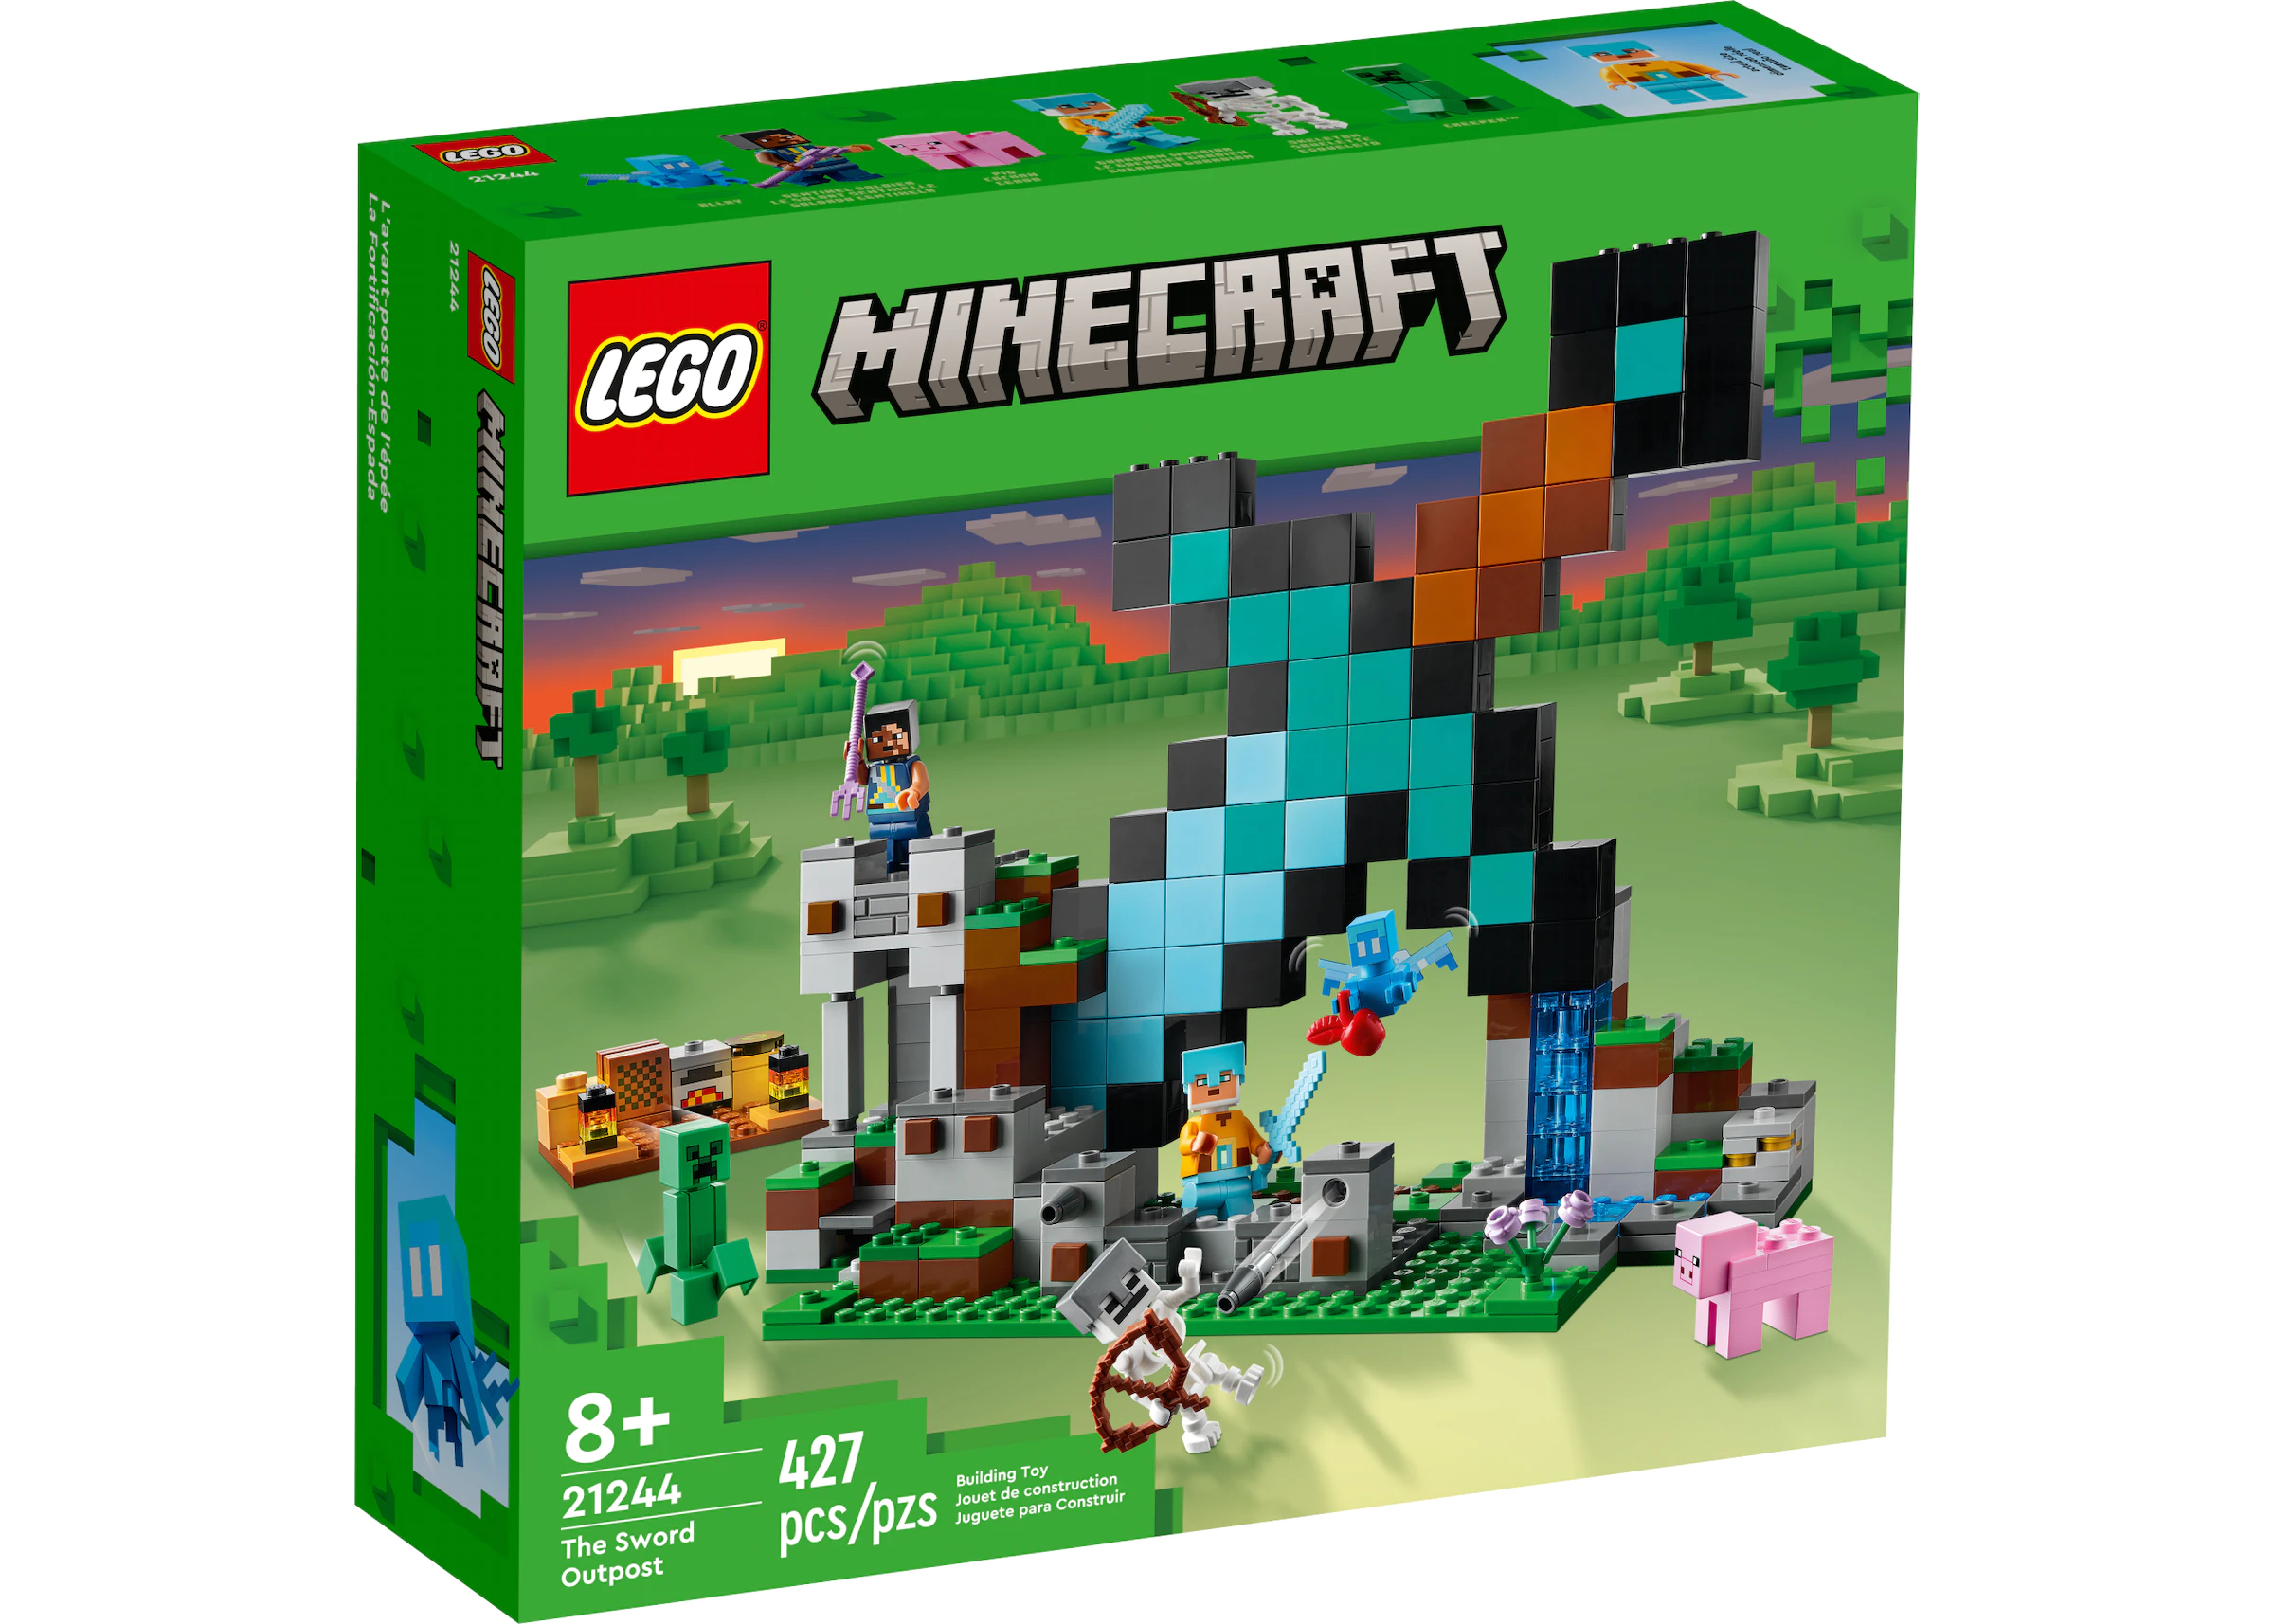 LEGO Minecraft - Buy & Sell Collectibles.